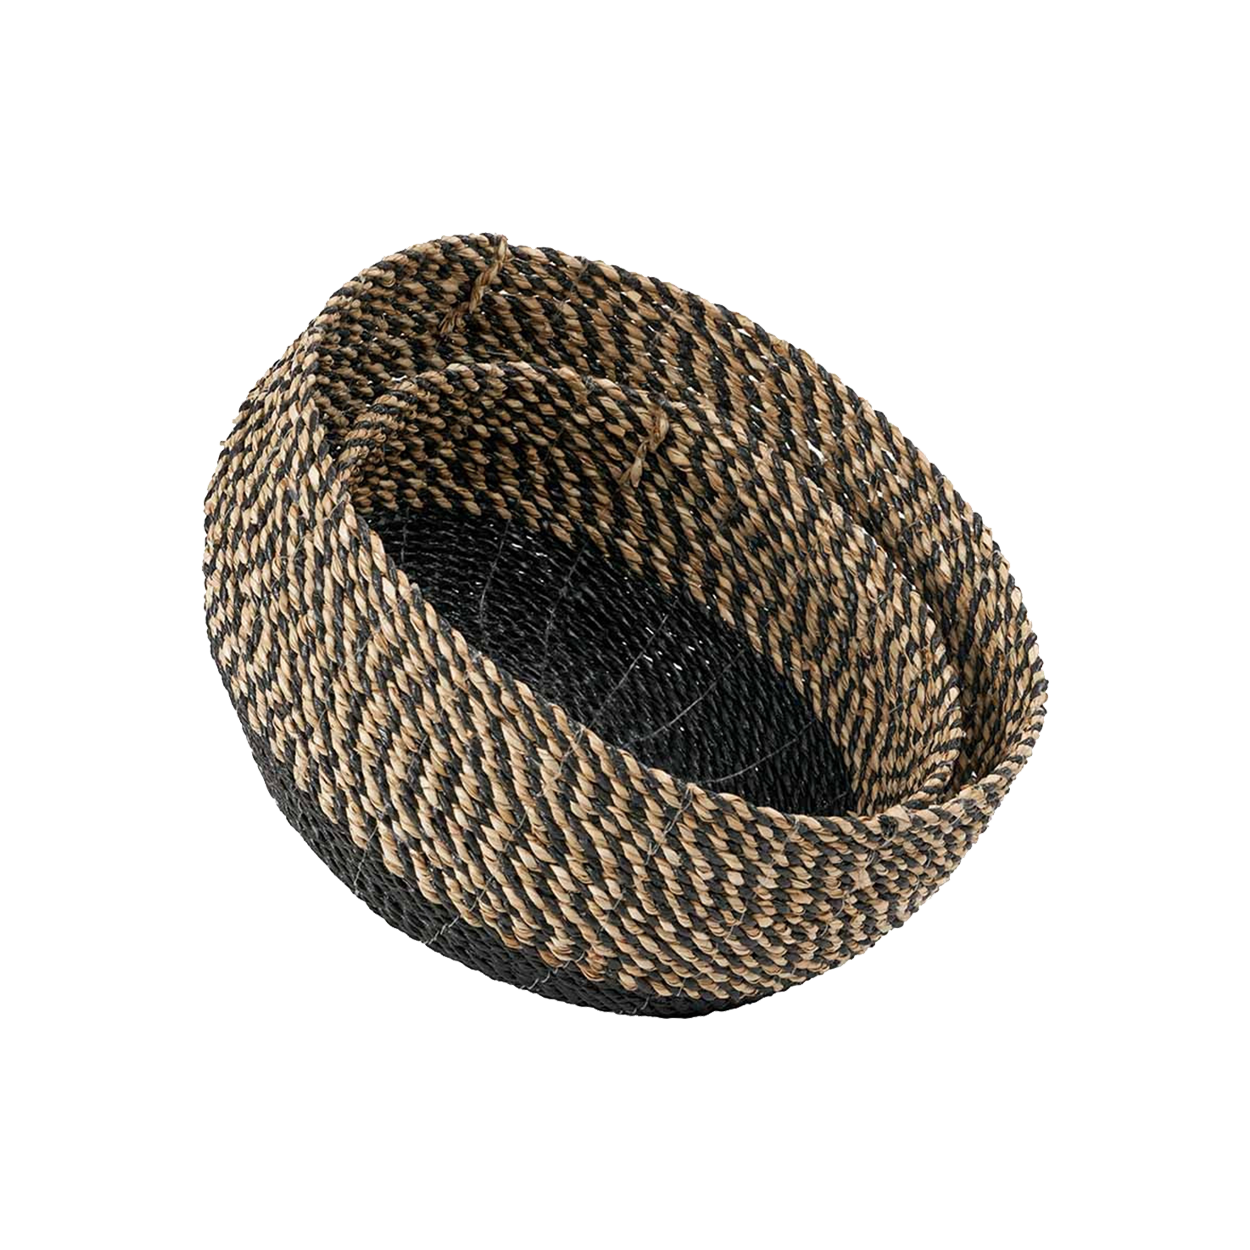 Set of 2 Seagrass Natural and Black Round Baskets